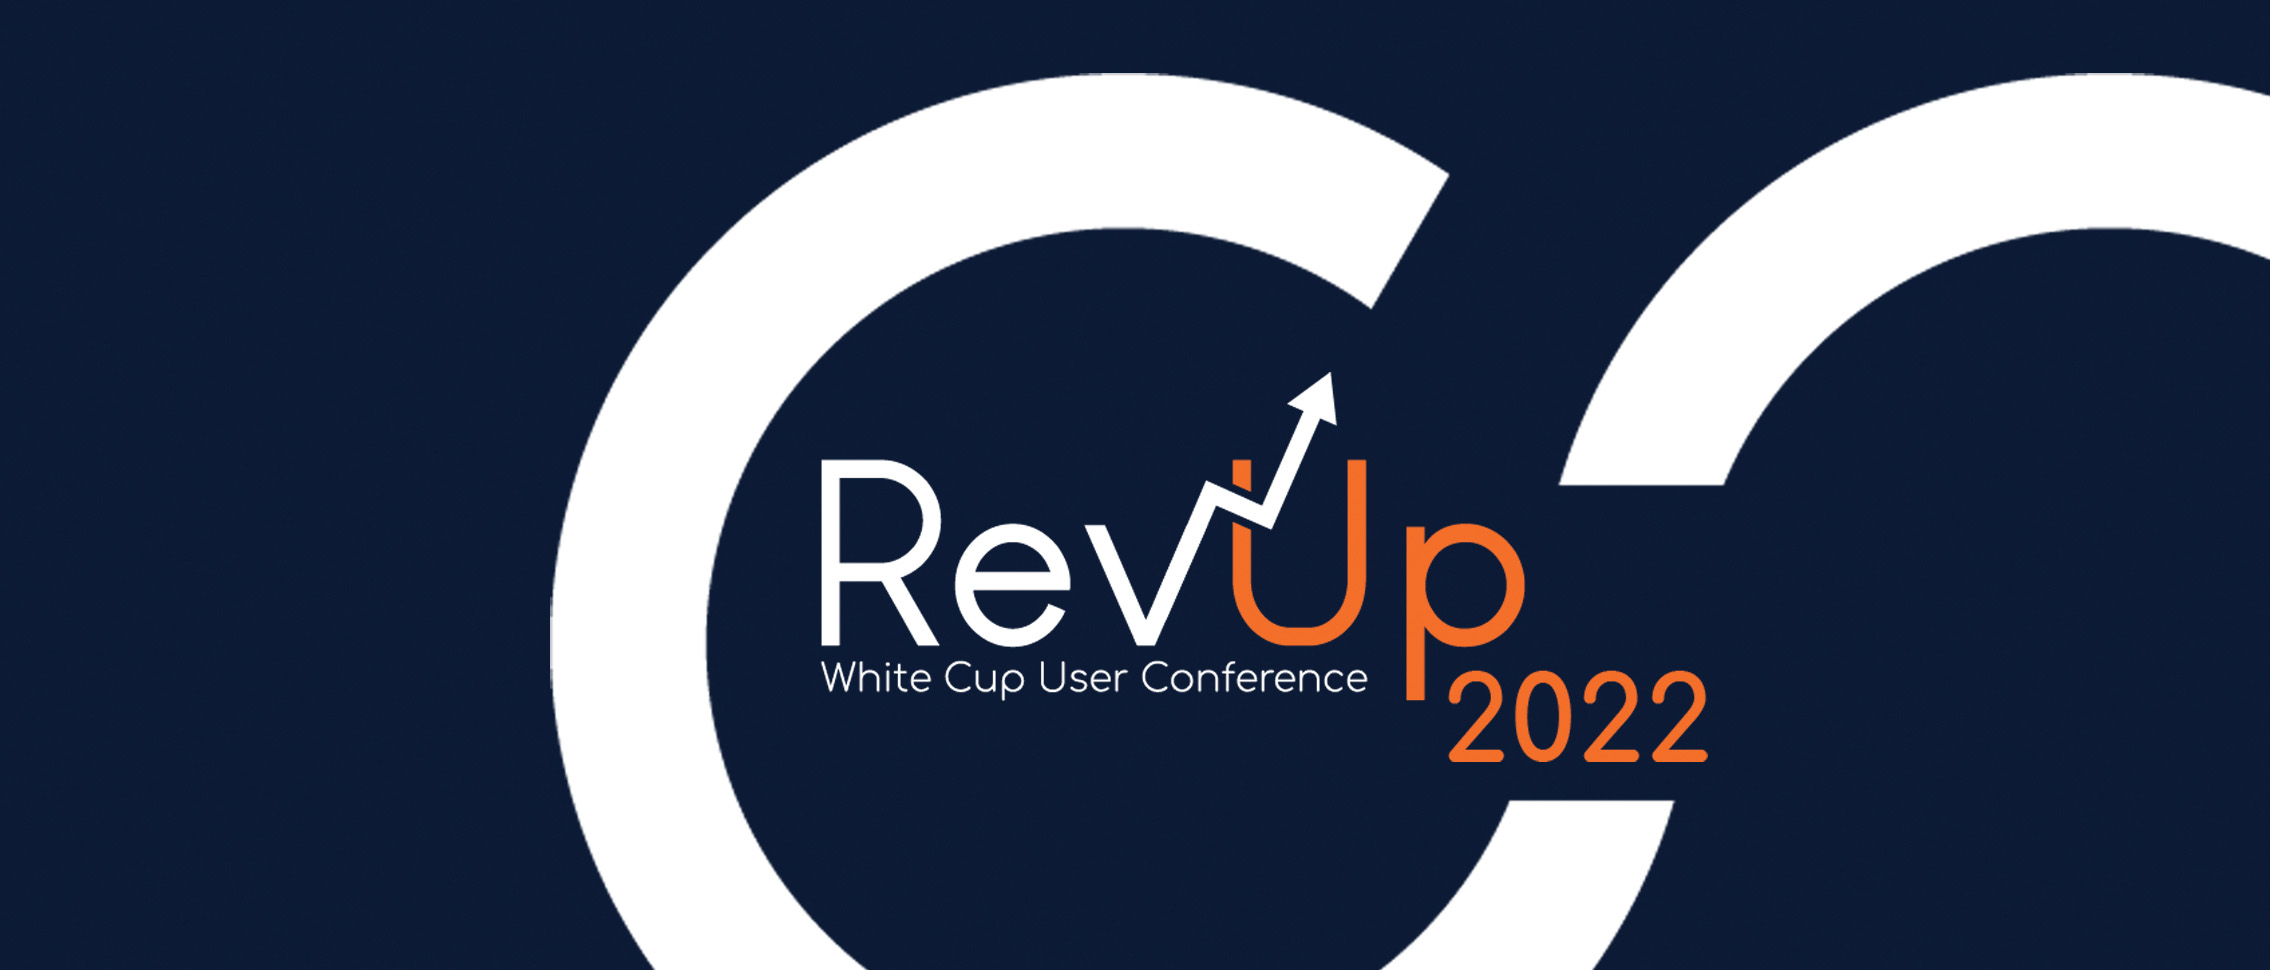 Revup 2022 White Cup User Conference